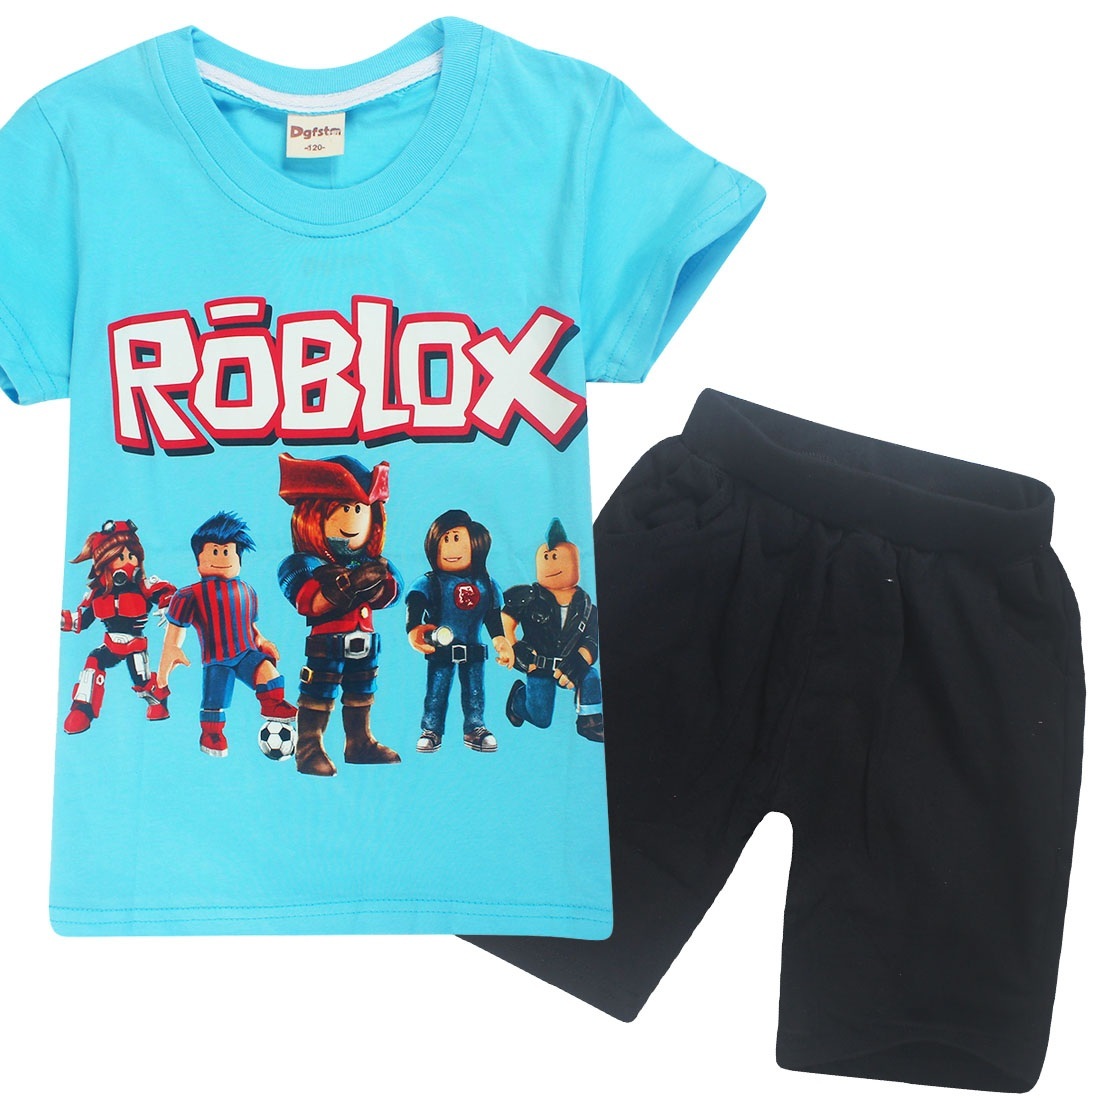 Roblox Theme New Arrival Green Kids T Shirt And 50 Similar Items - t 50 roblox